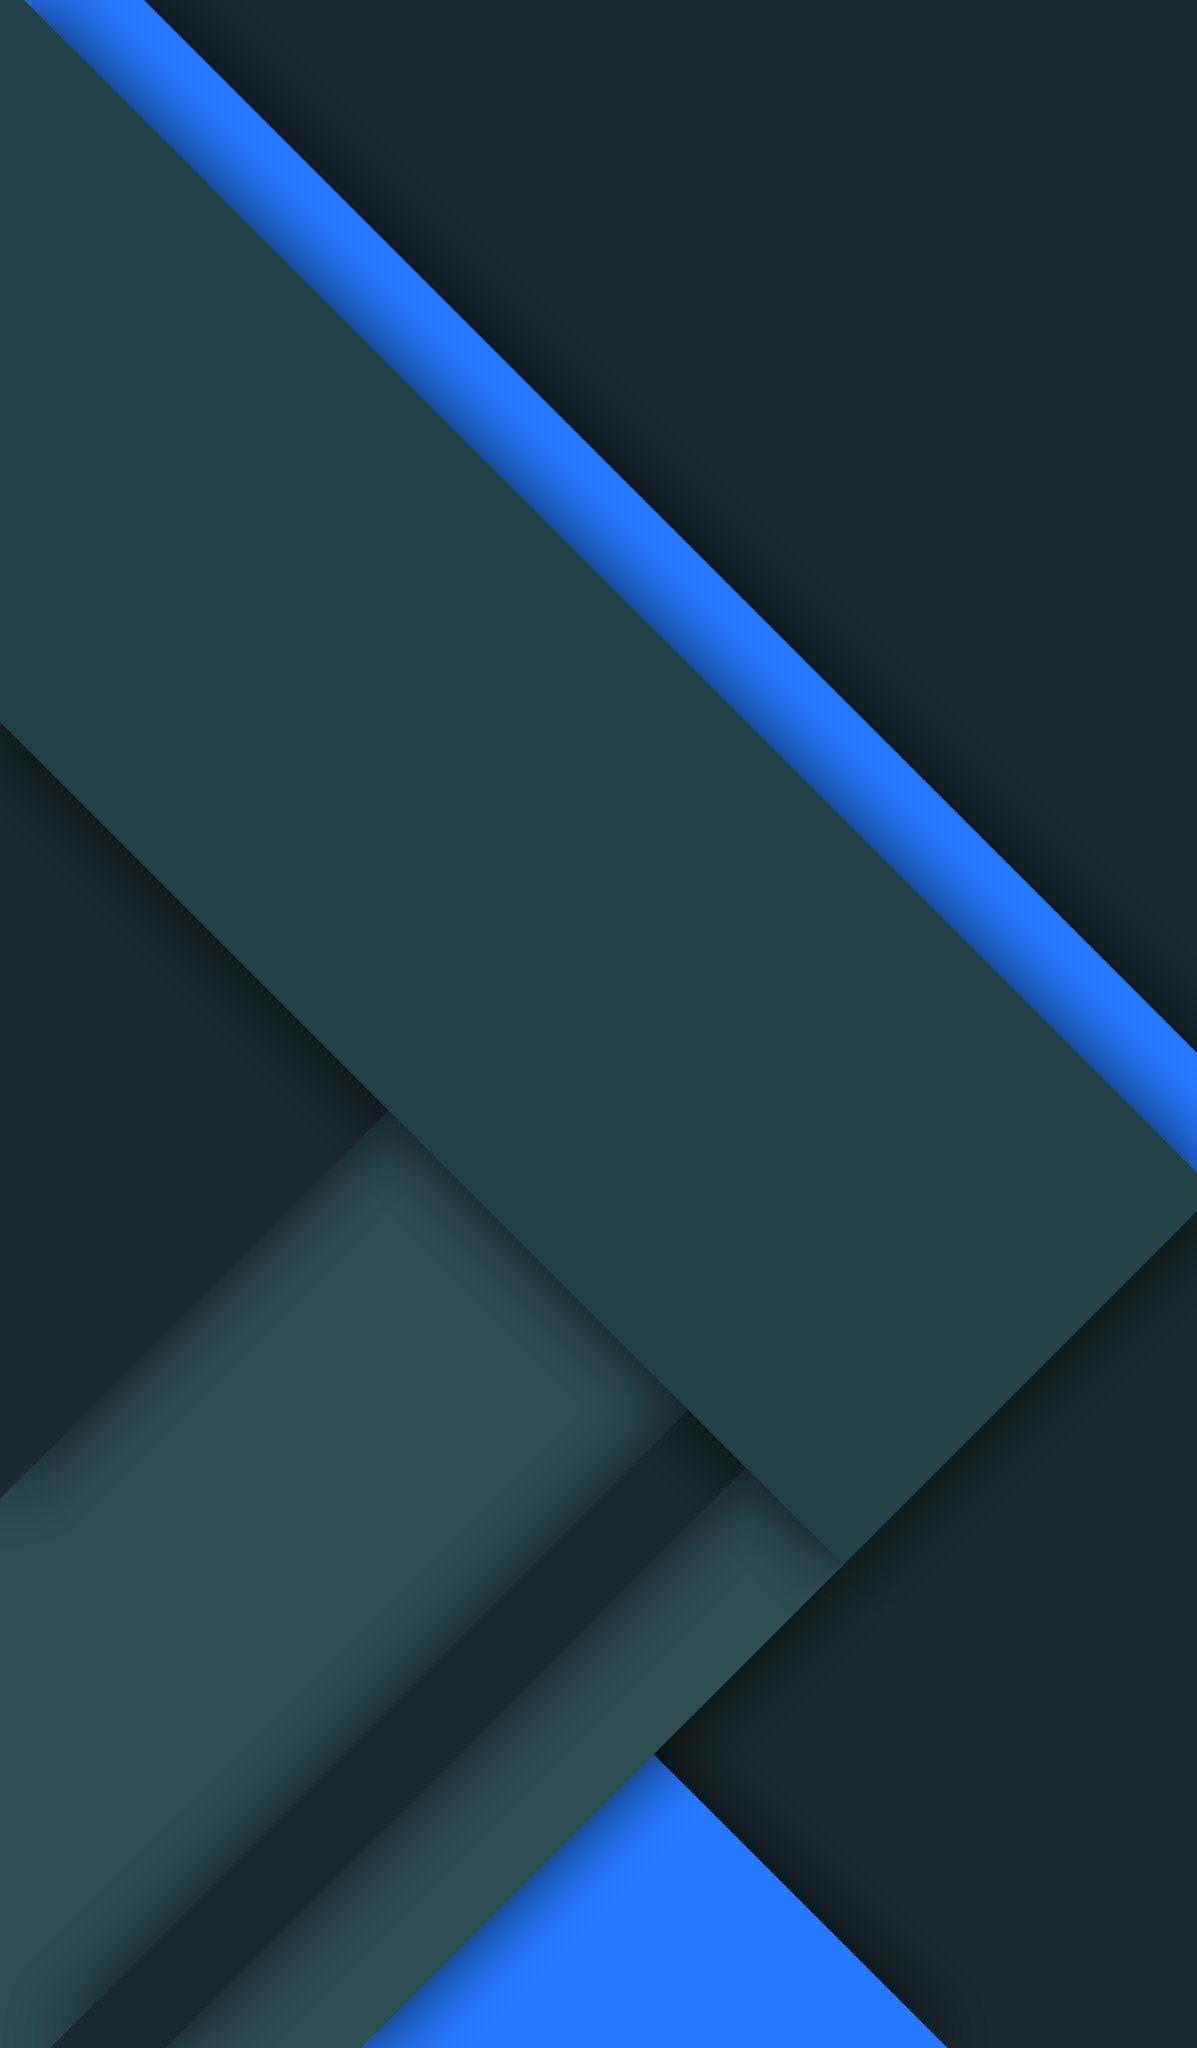 Android Material Design Wallpapers Top Free Android Material Design Backgrounds Wallpaperaccess